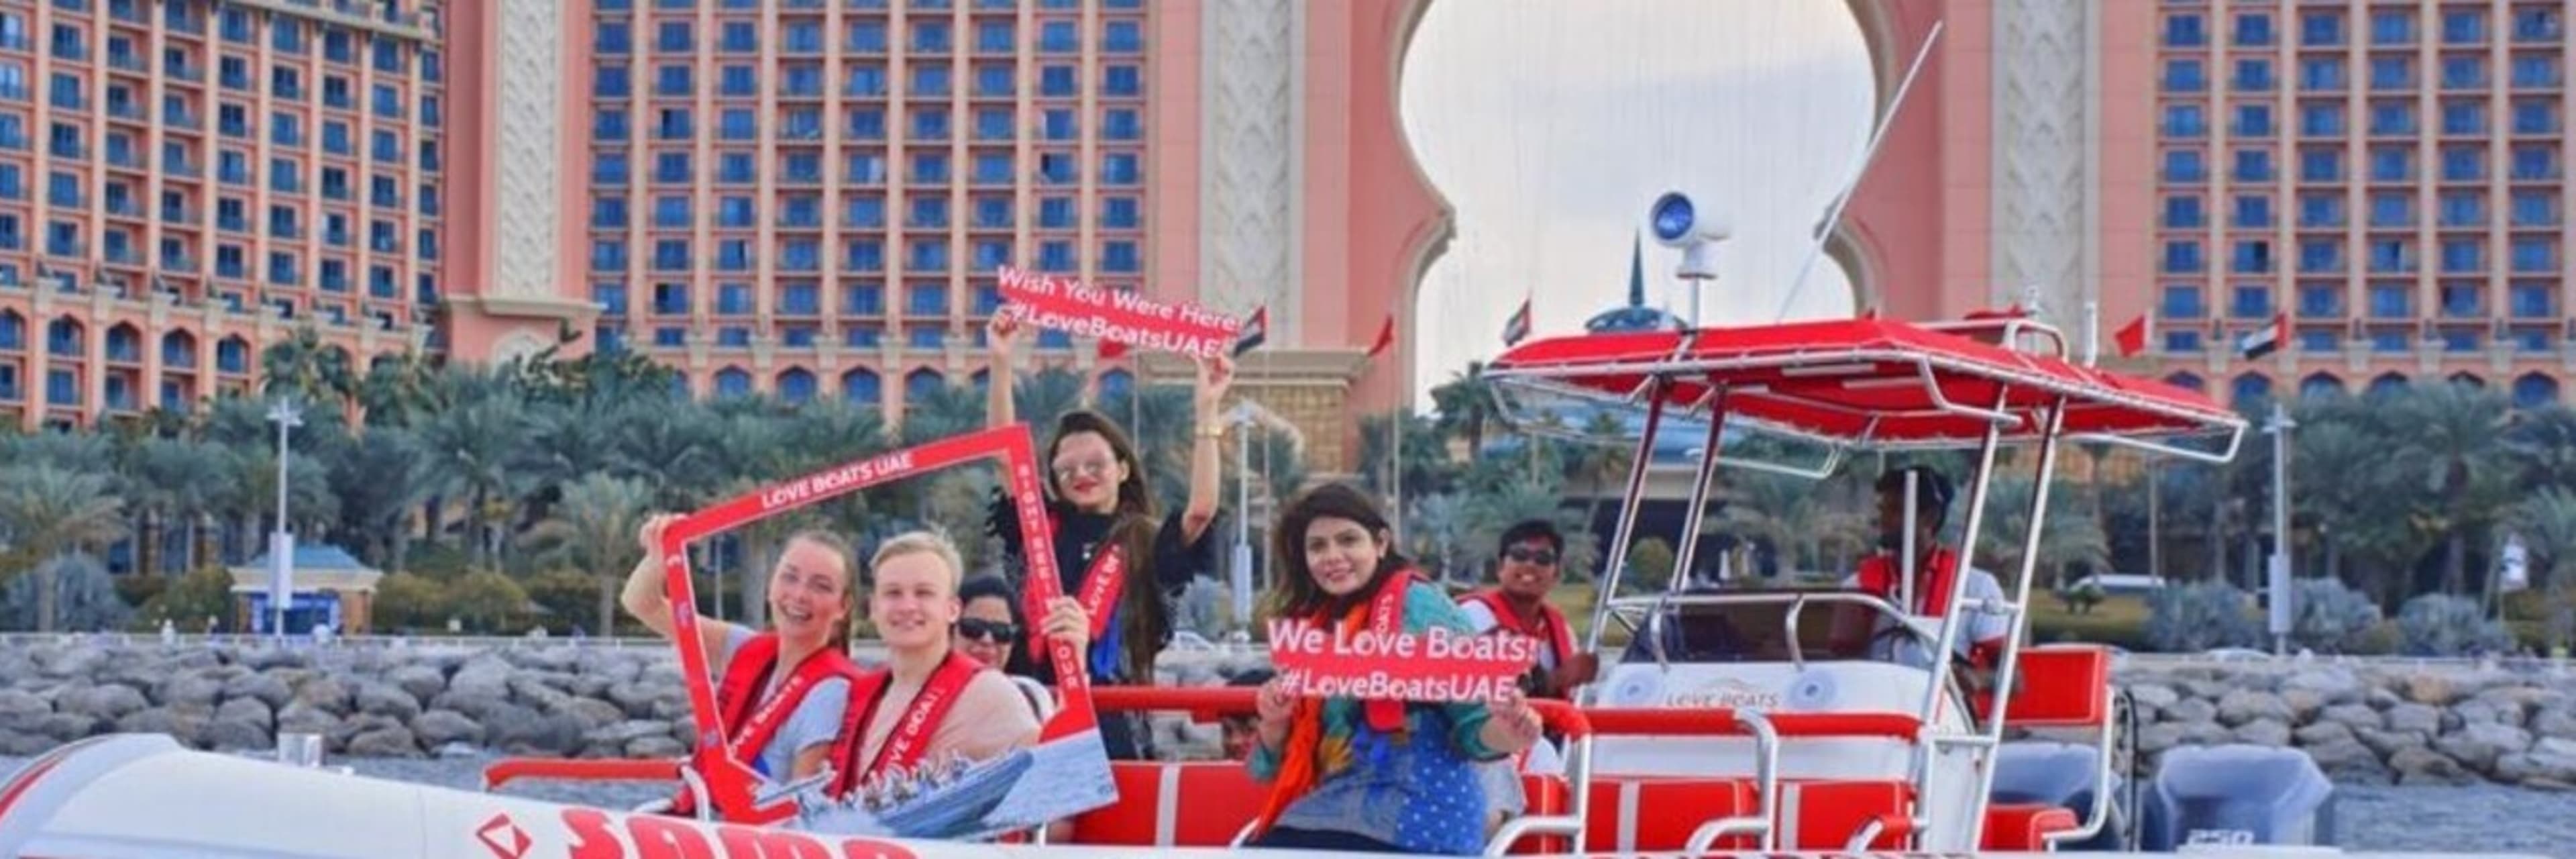 Love Boats speedboat tour pausing for photos in front of Atlantis The Palm, Dubai.